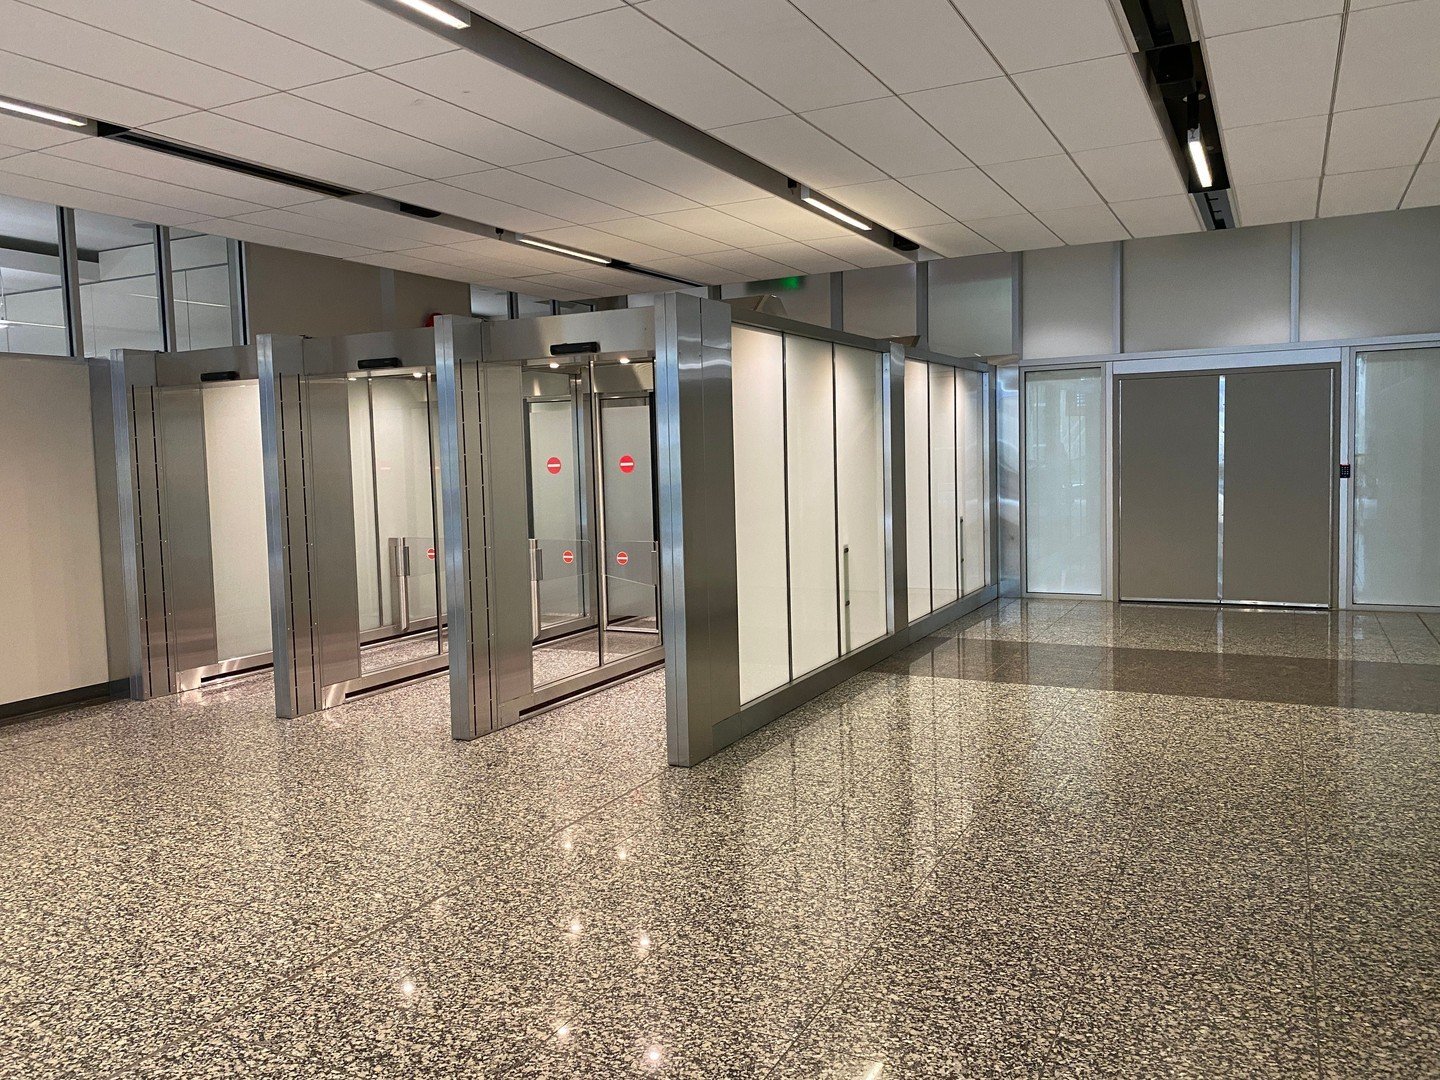 🏆 Area of Expertise: Airport Design
✈️ Project: YYC Backflow - Concourse A and C
 
Fun Fact: Riddell Kurczaba has been actively engaged in projects at multiple airports across Western Canada, notably including YYC Calgary International Airport. Our 